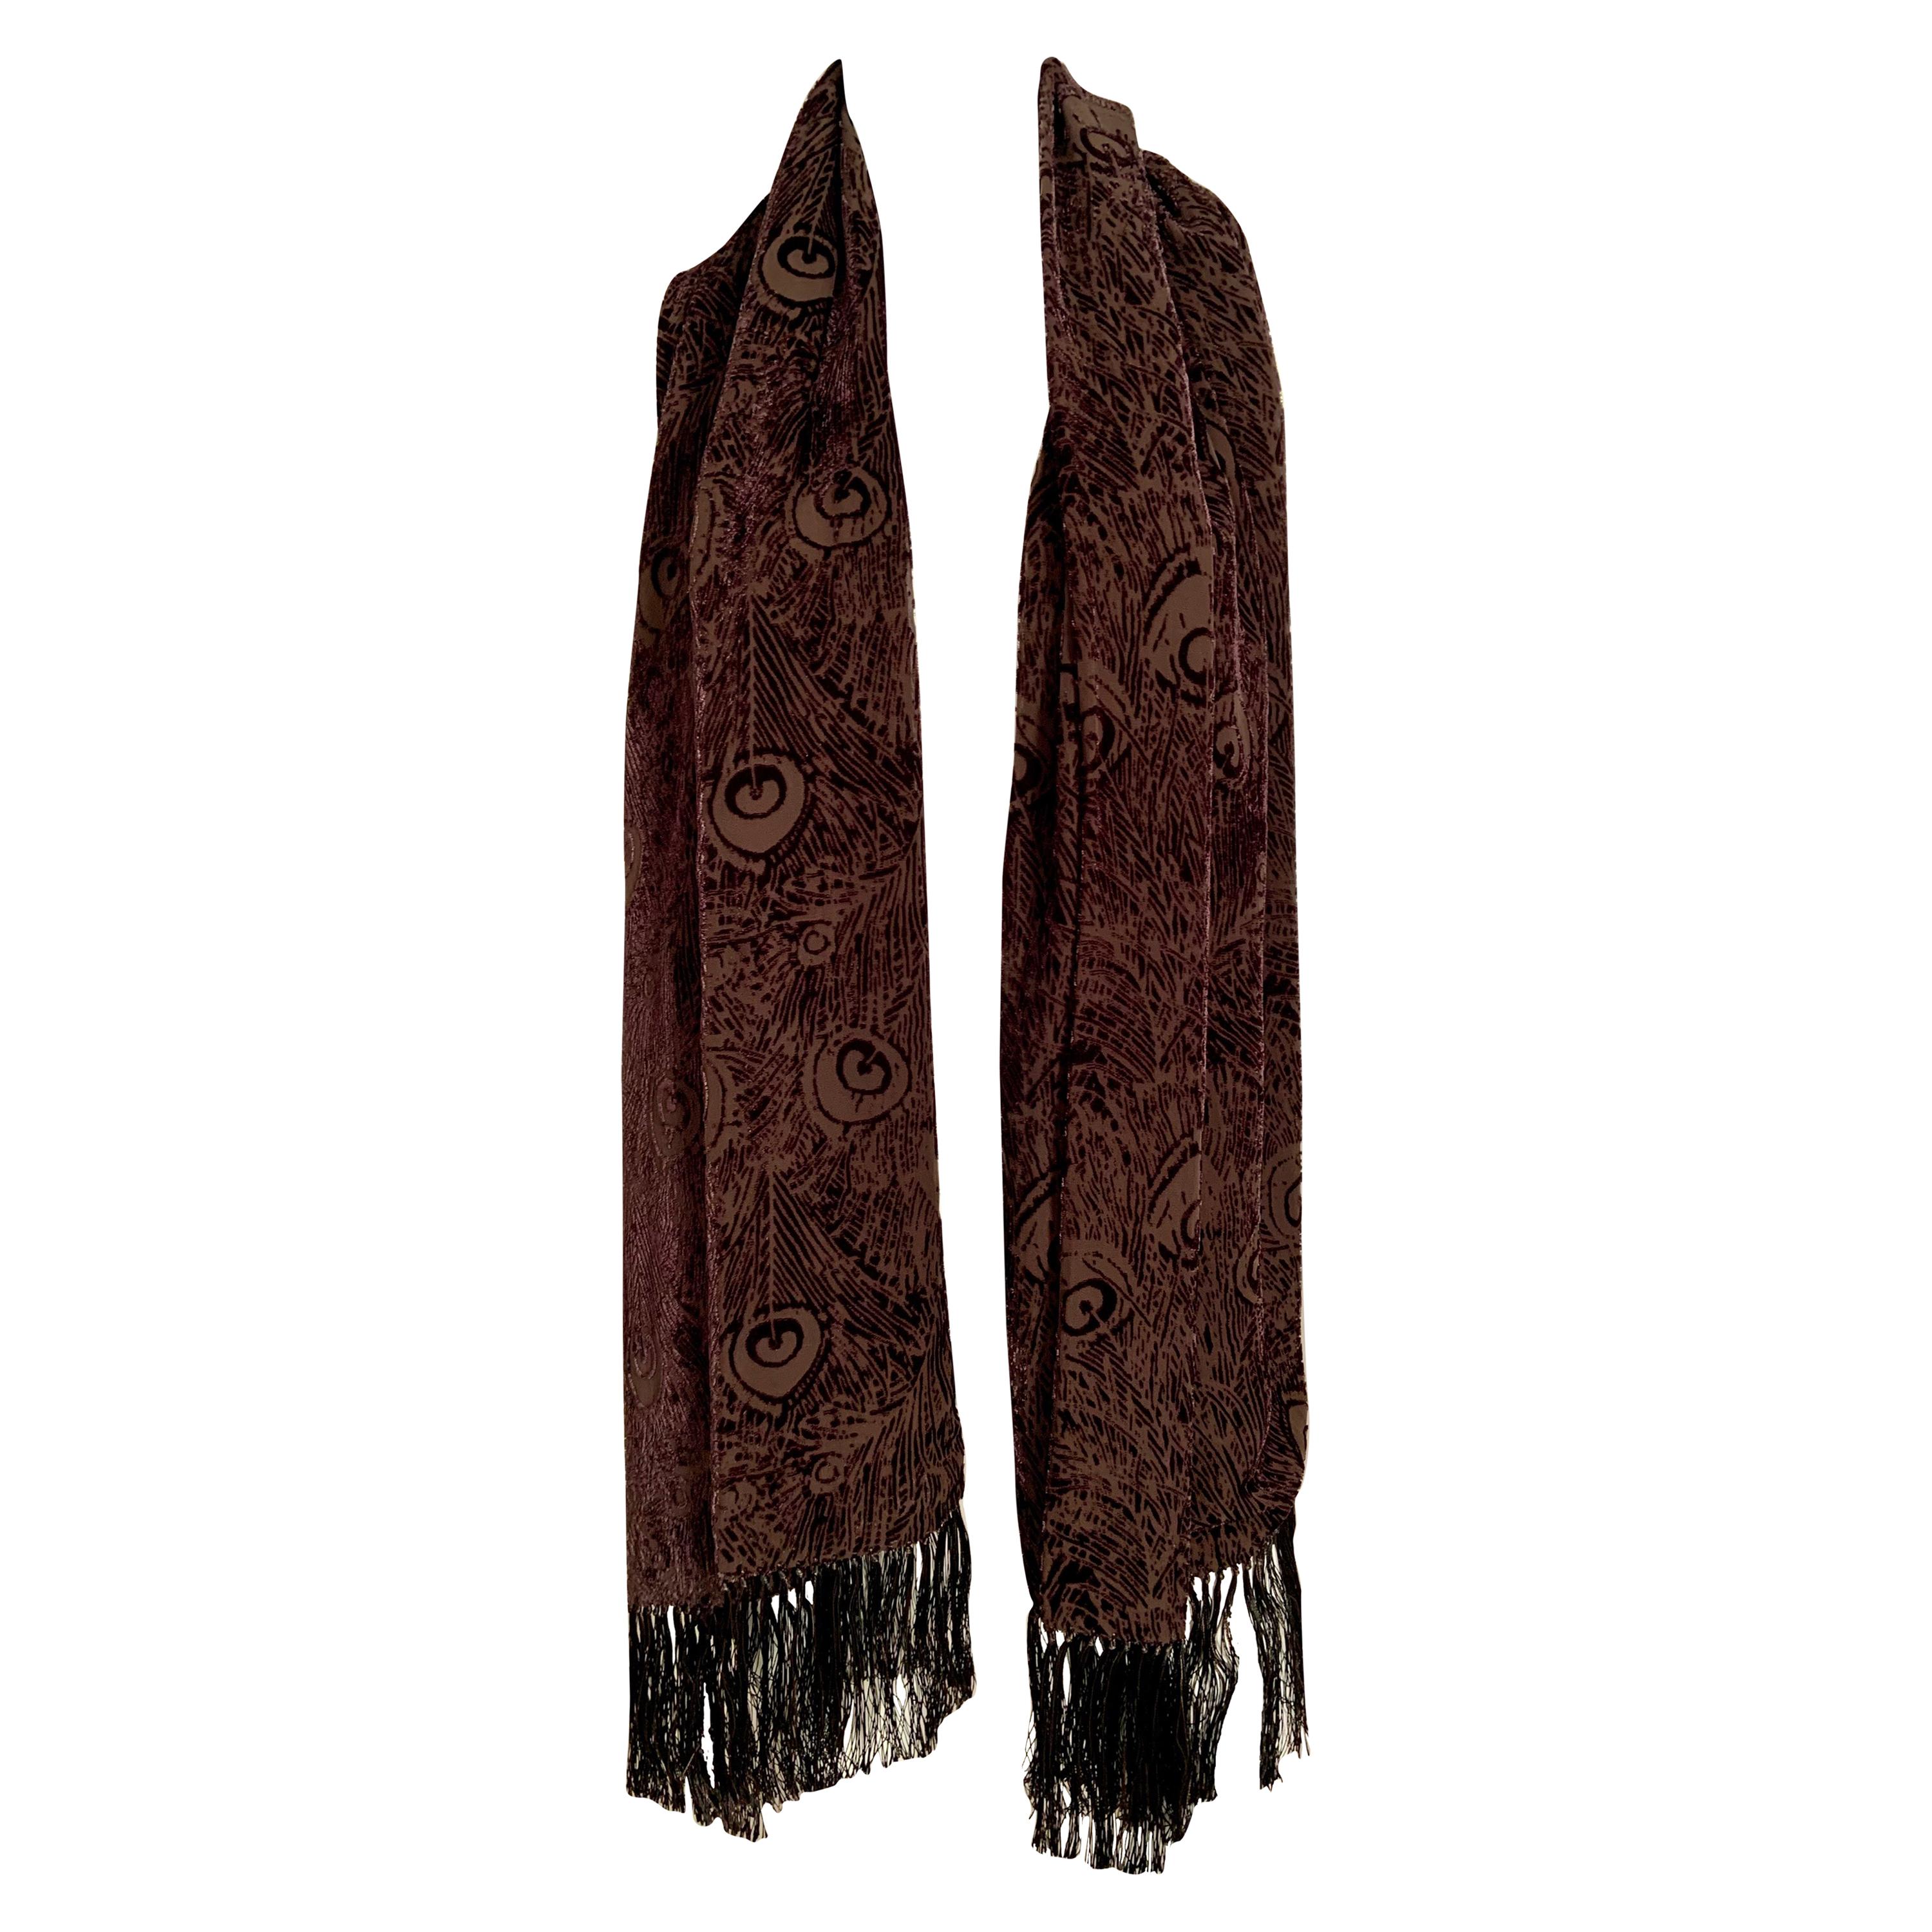 Liberty Chocolate Brown Voided Velvet Fringed Shawl with Peacock Feather Design